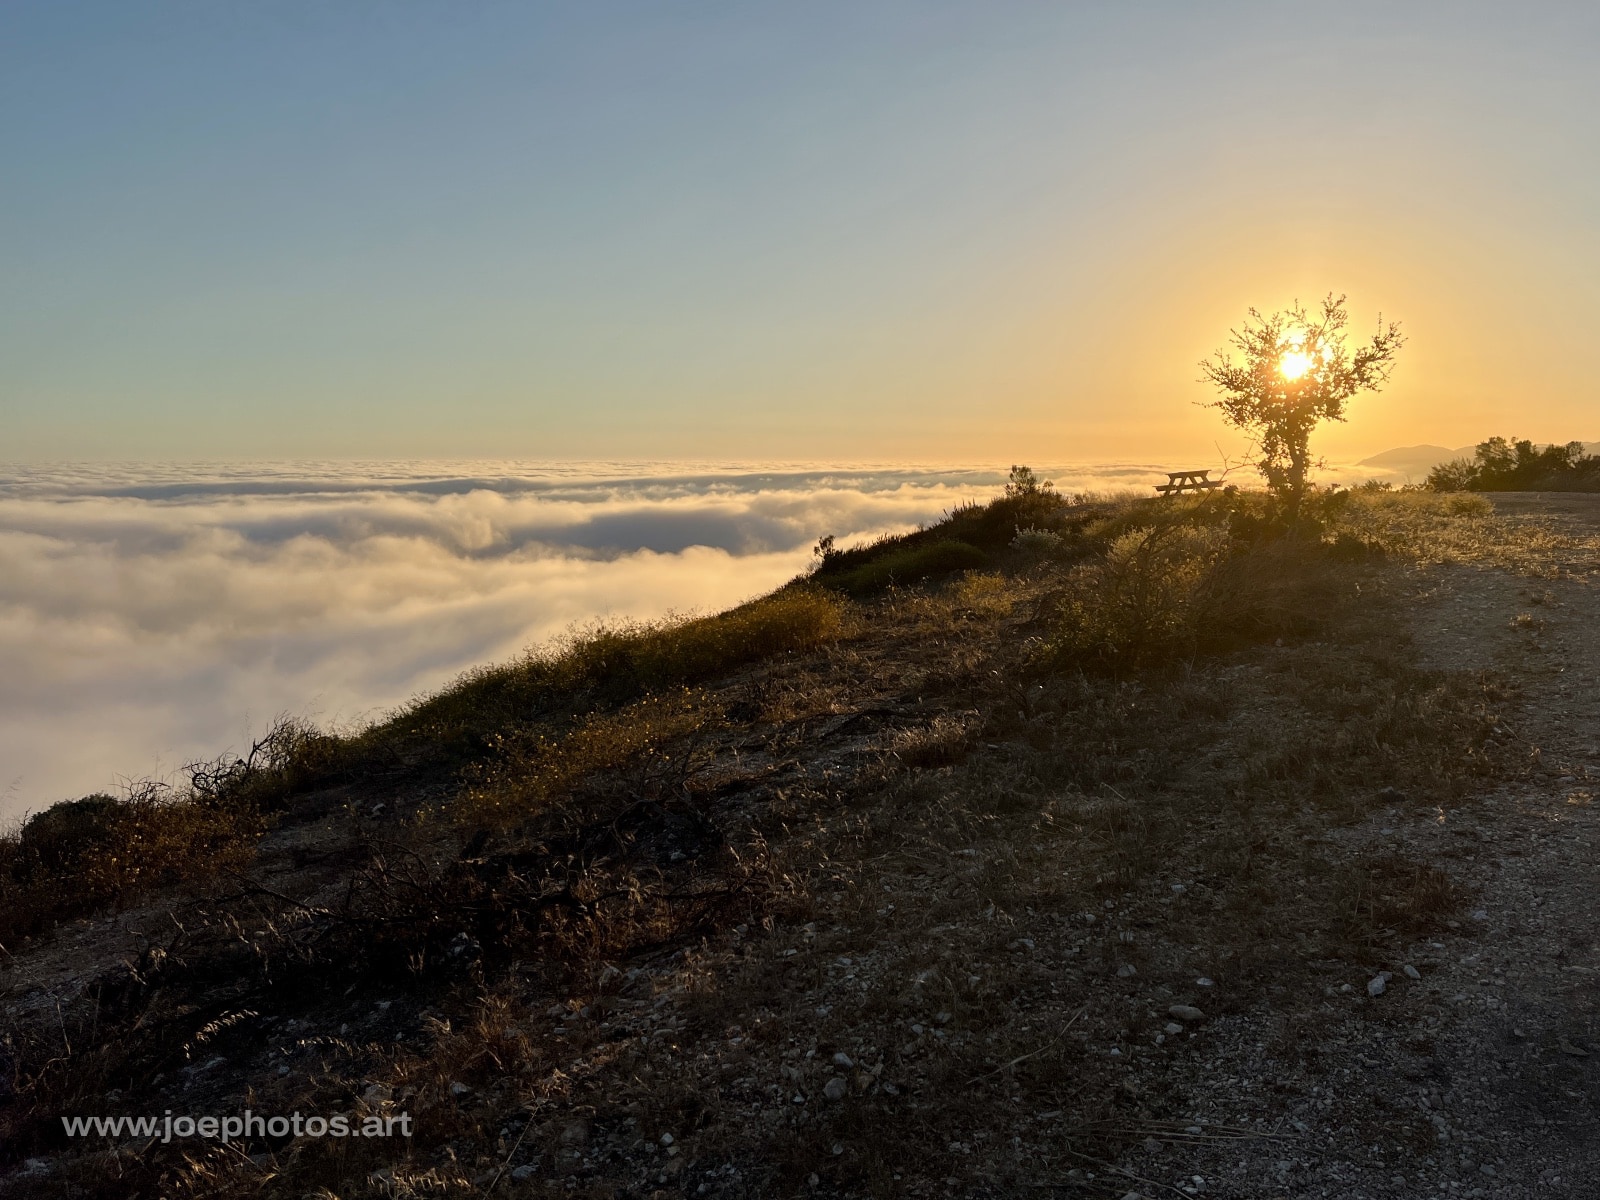 Hilltop above marine layer with bench at sunset.